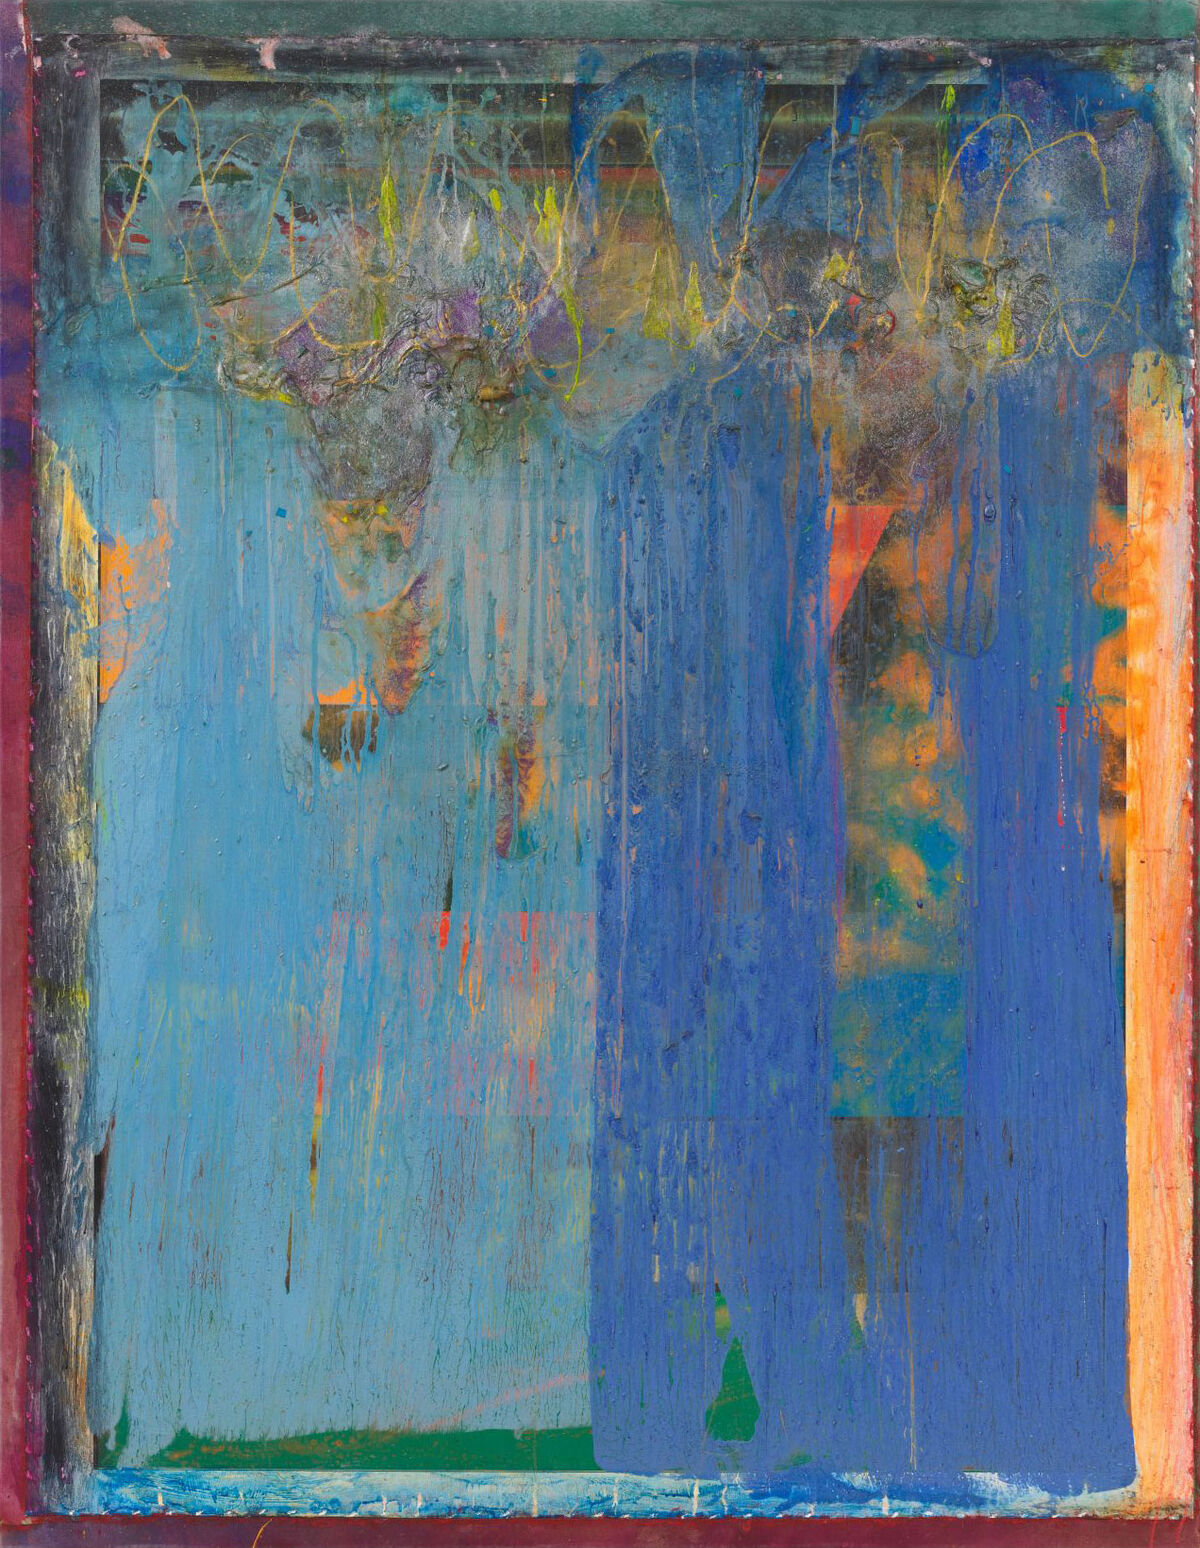 Frank Bowling, Two Blues, 2018. © Frank Bowling/Artists Rights Society (ARS), New York; DACS, London. Courtesy of Alexander Gray Associates, New York; Hales Gallery, London; and Marc Selwyn Fine Art, Los Angeles.